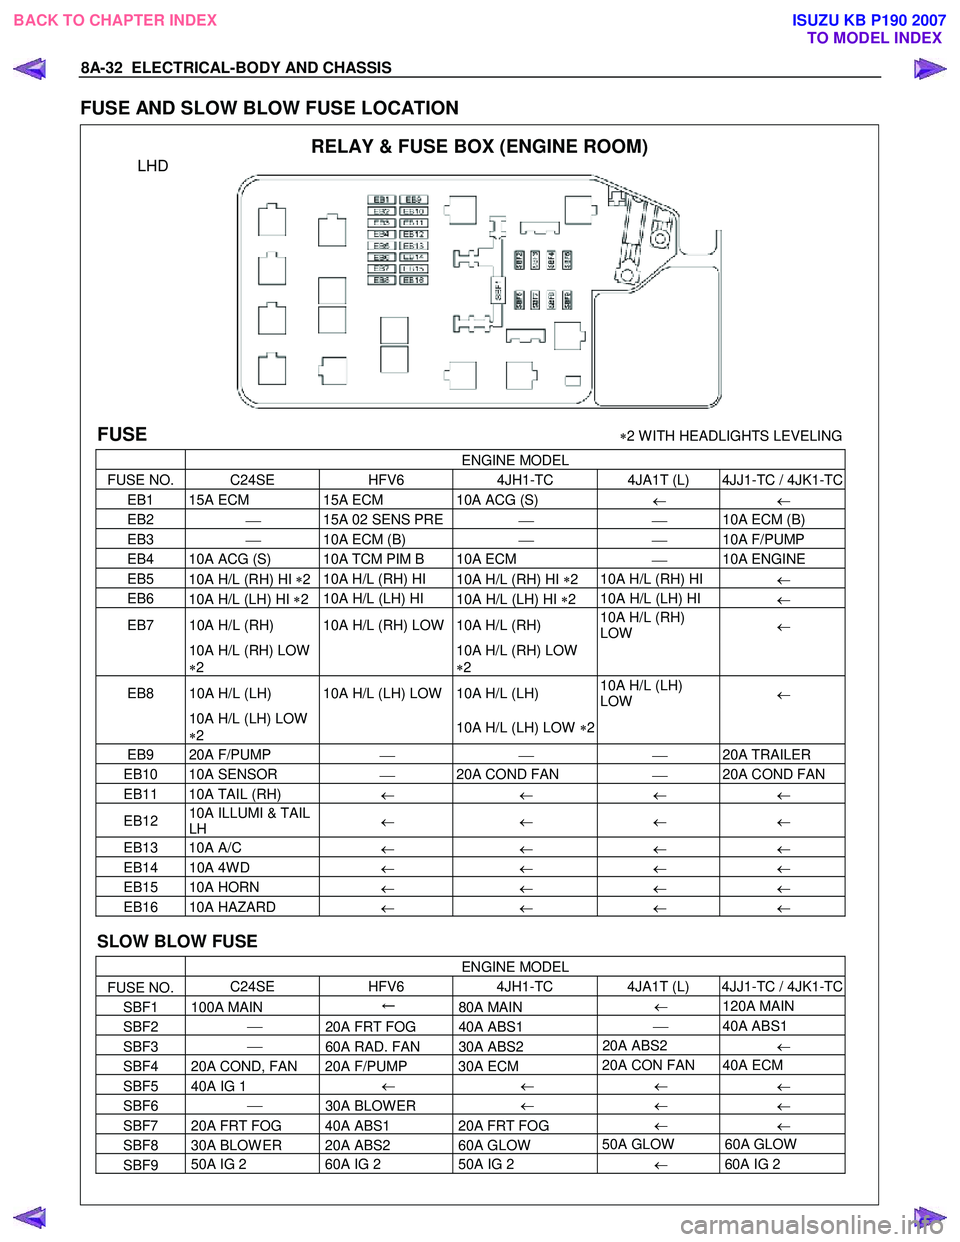 ISUZU KB P190 2007  Workshop User Guide 8A-32  ELECTRICAL-BODY AND CHASSIS 
FUSE AND SLOW BLOW FUSE LOCATION 
 RELAY & FUSE BOX (ENGINE ROOM) 
LHD 
 
FUSE  ∗2 W ITH HEADLIGHTS LEVELING
 ENGINE  MODEL 
FUSE NO.  C24SE HFV6 4JH1-TC  4JA1T (